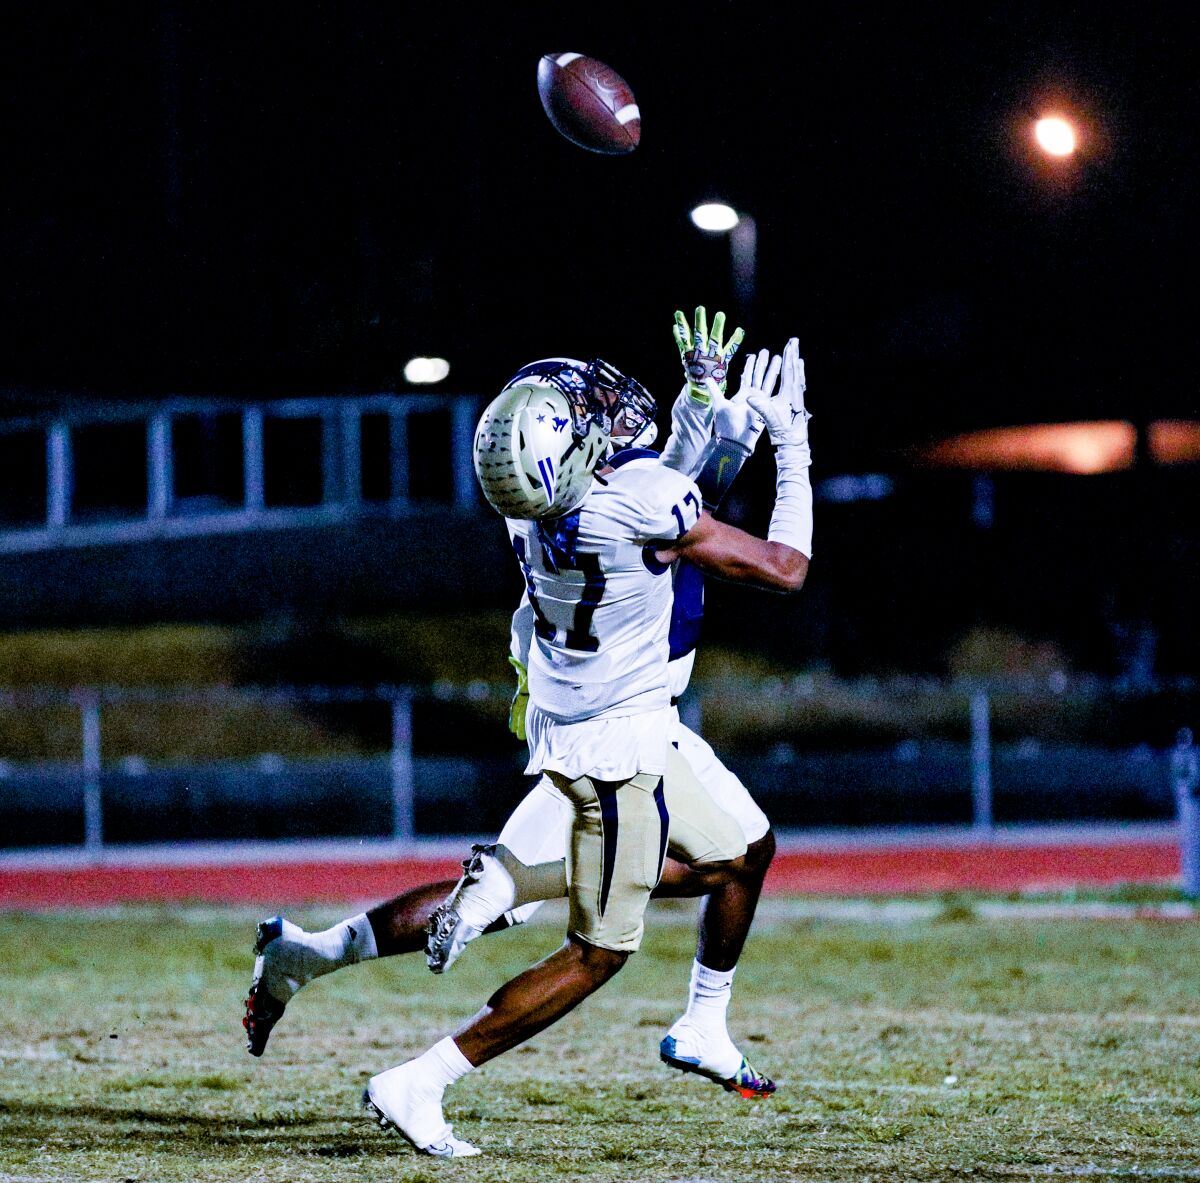 Peyton Waters of Birmingham looks like he's going to make a great catch. He does to make an interception against Venice.